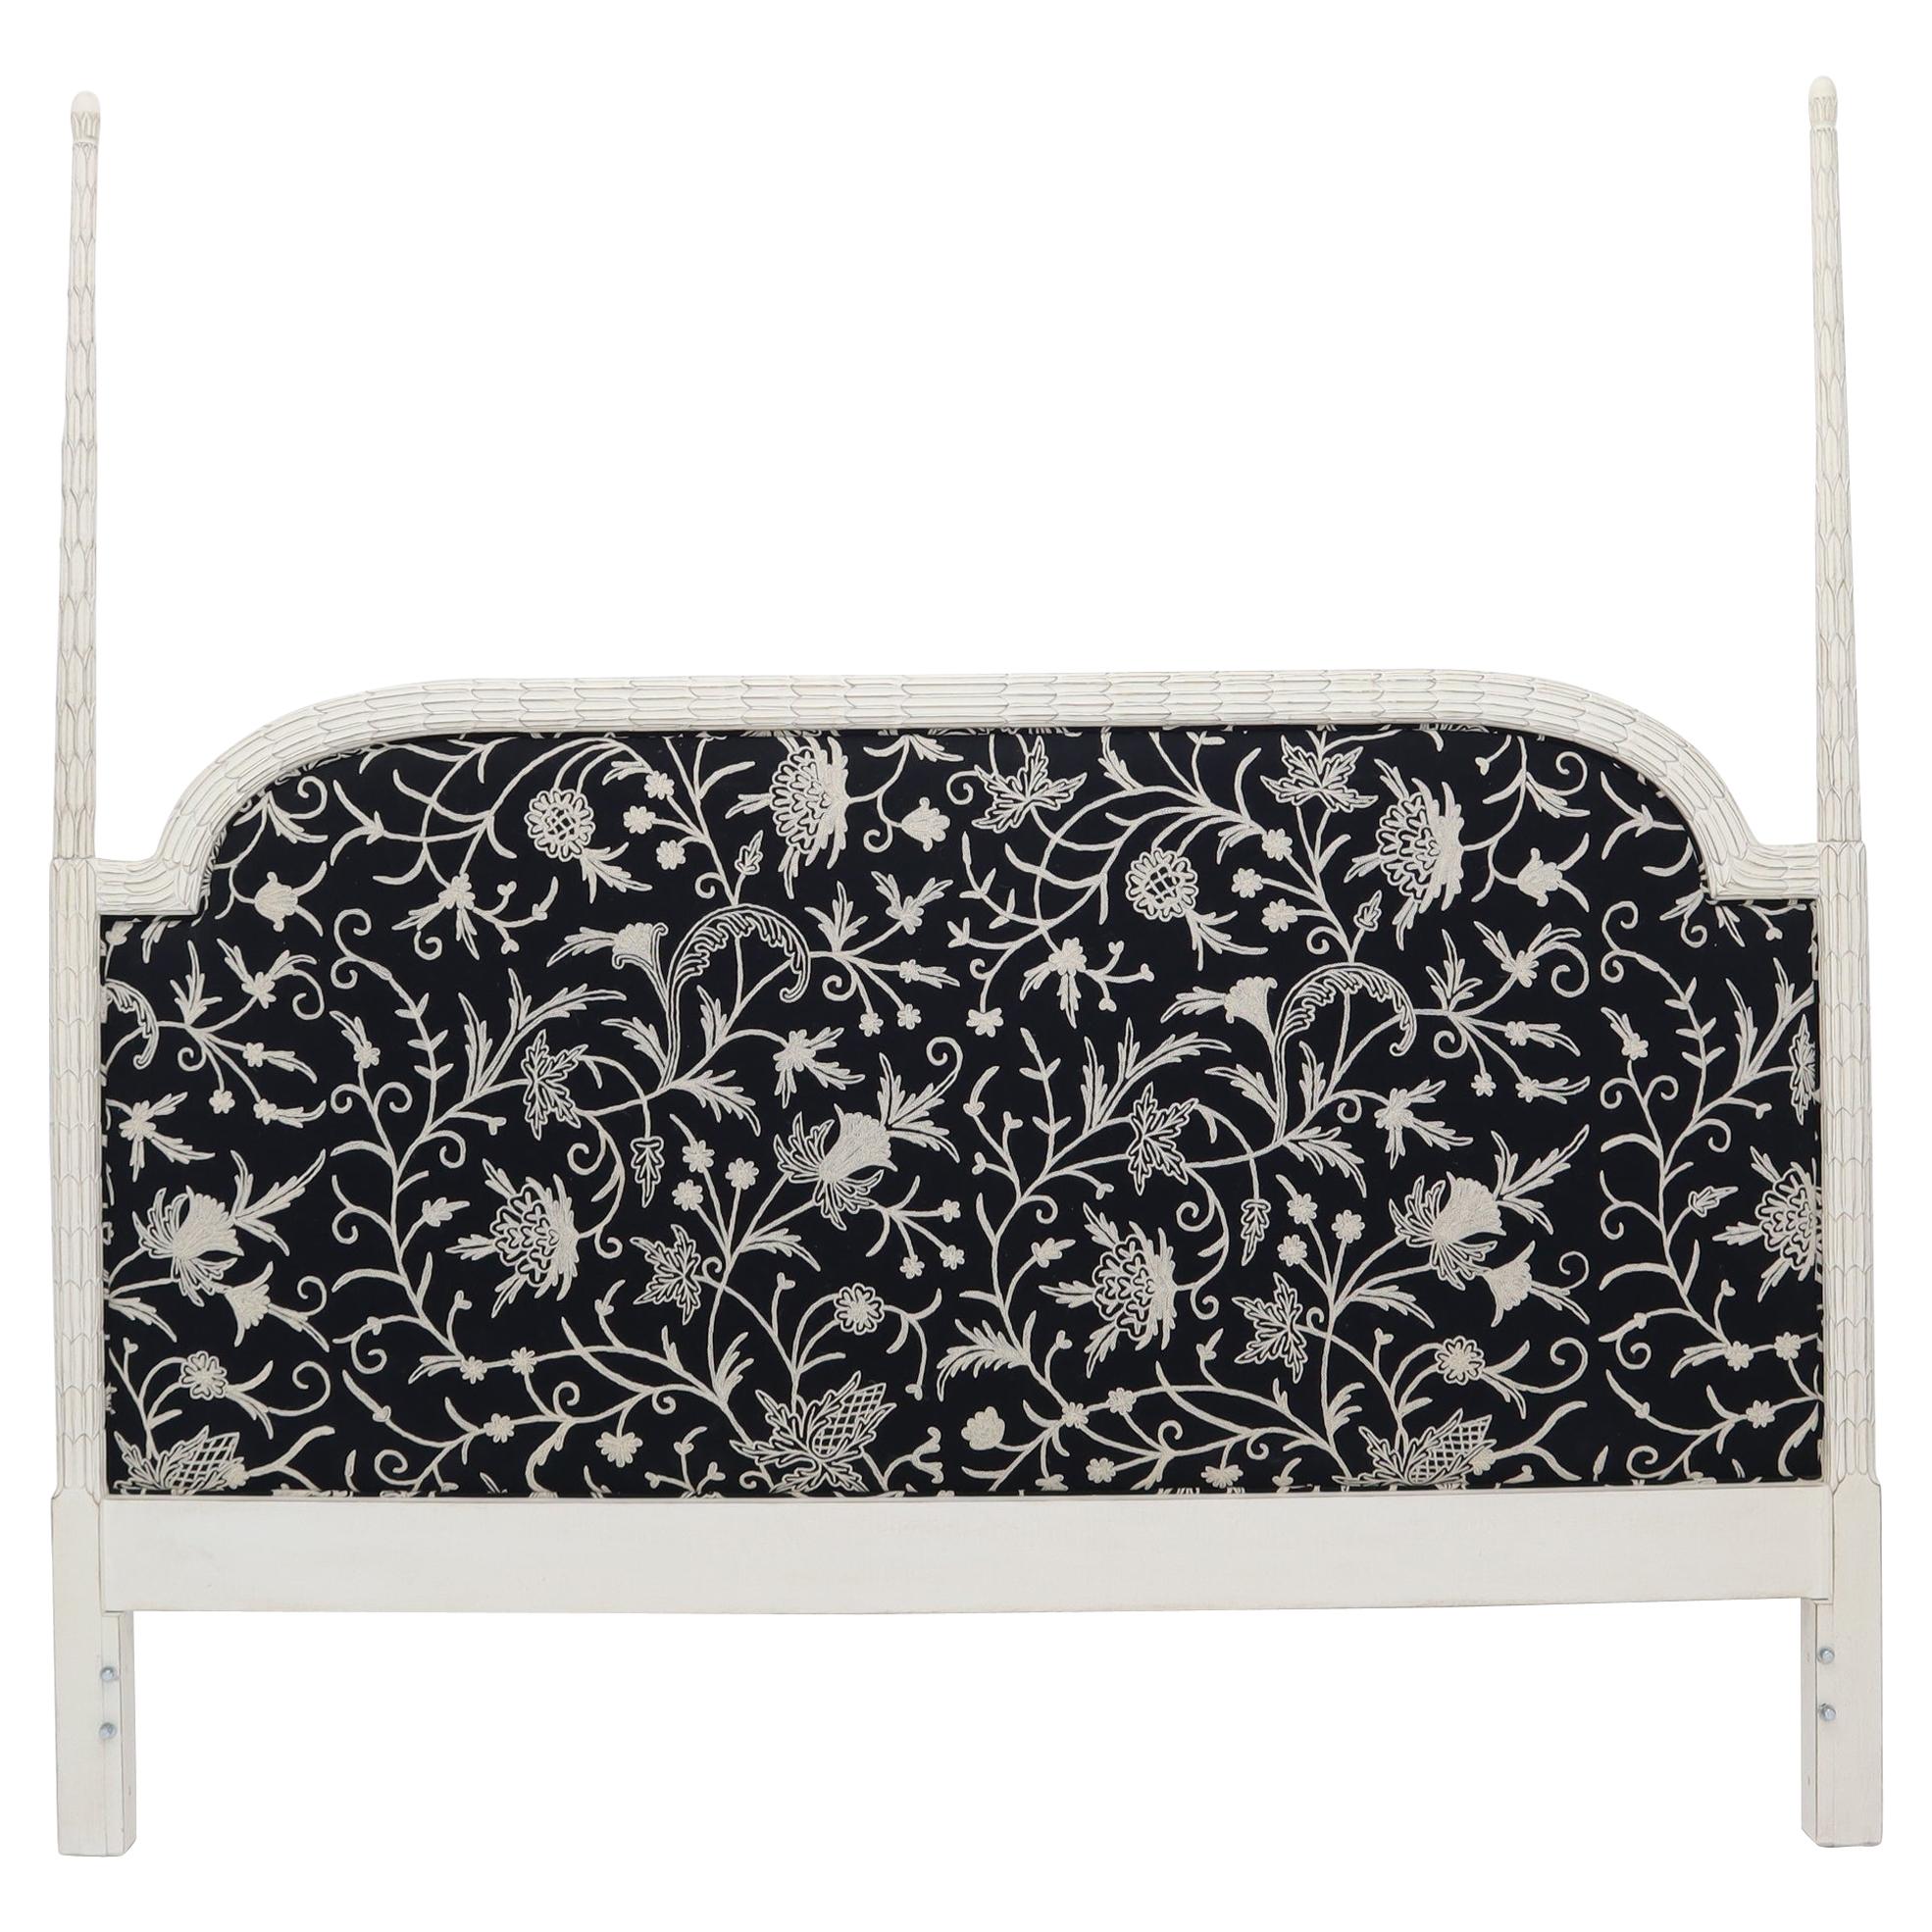 Upholstered Decorative Black and White Fabric King Size Poster Headboard